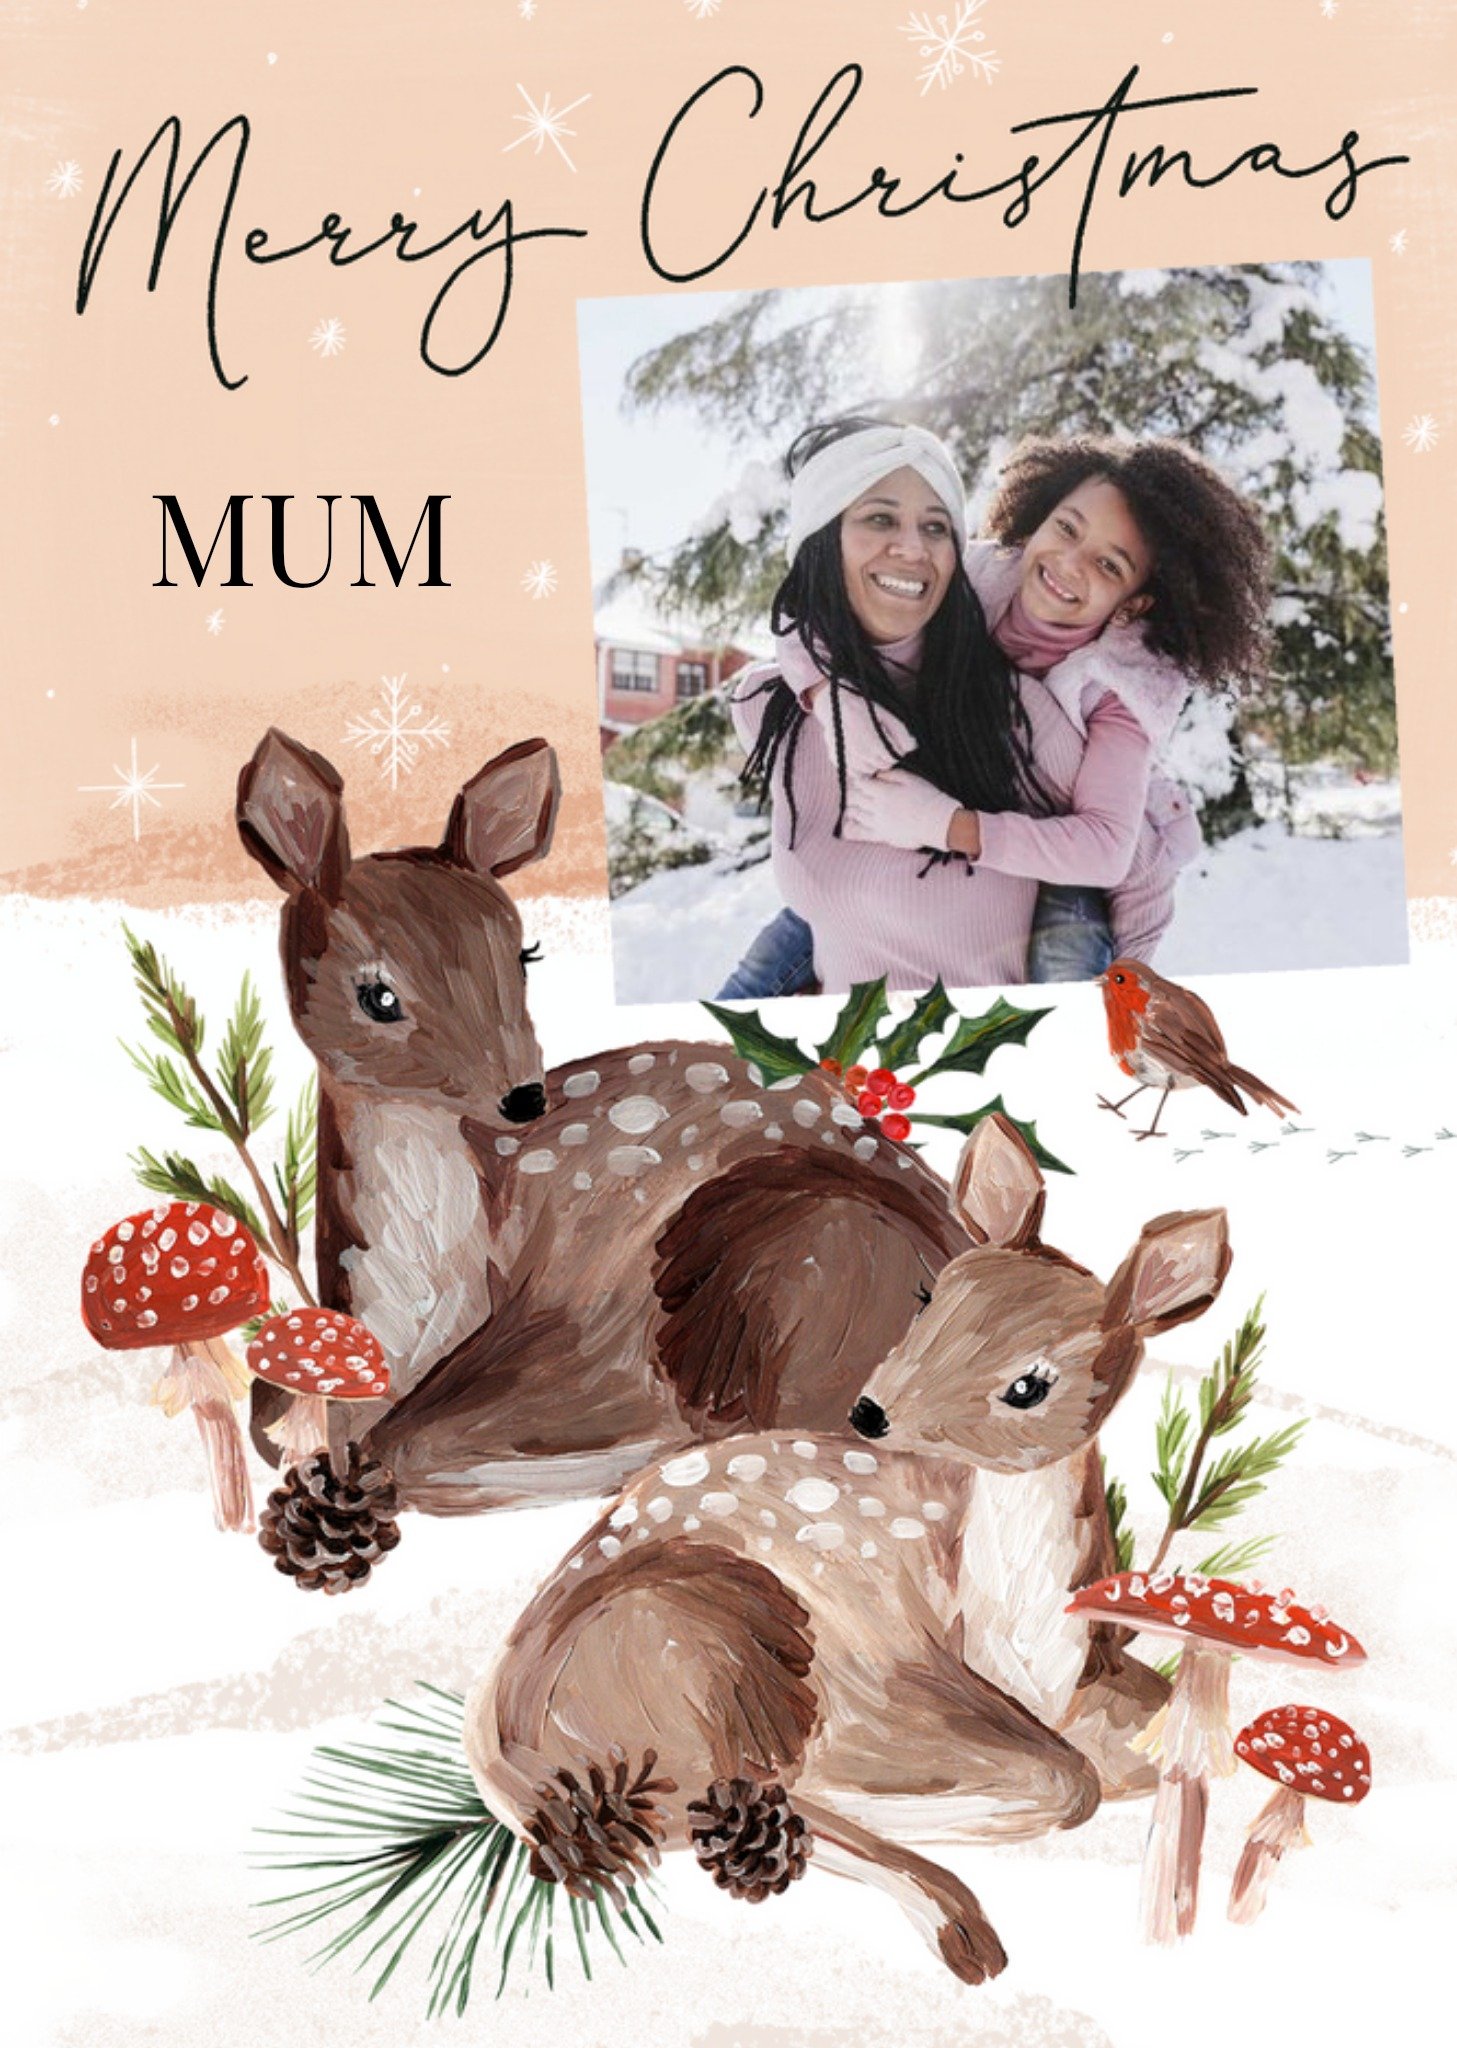 Moonpig Adorable Illustration Of Two Dears Resting In Snow Photo Upload Christmas Card Ecard